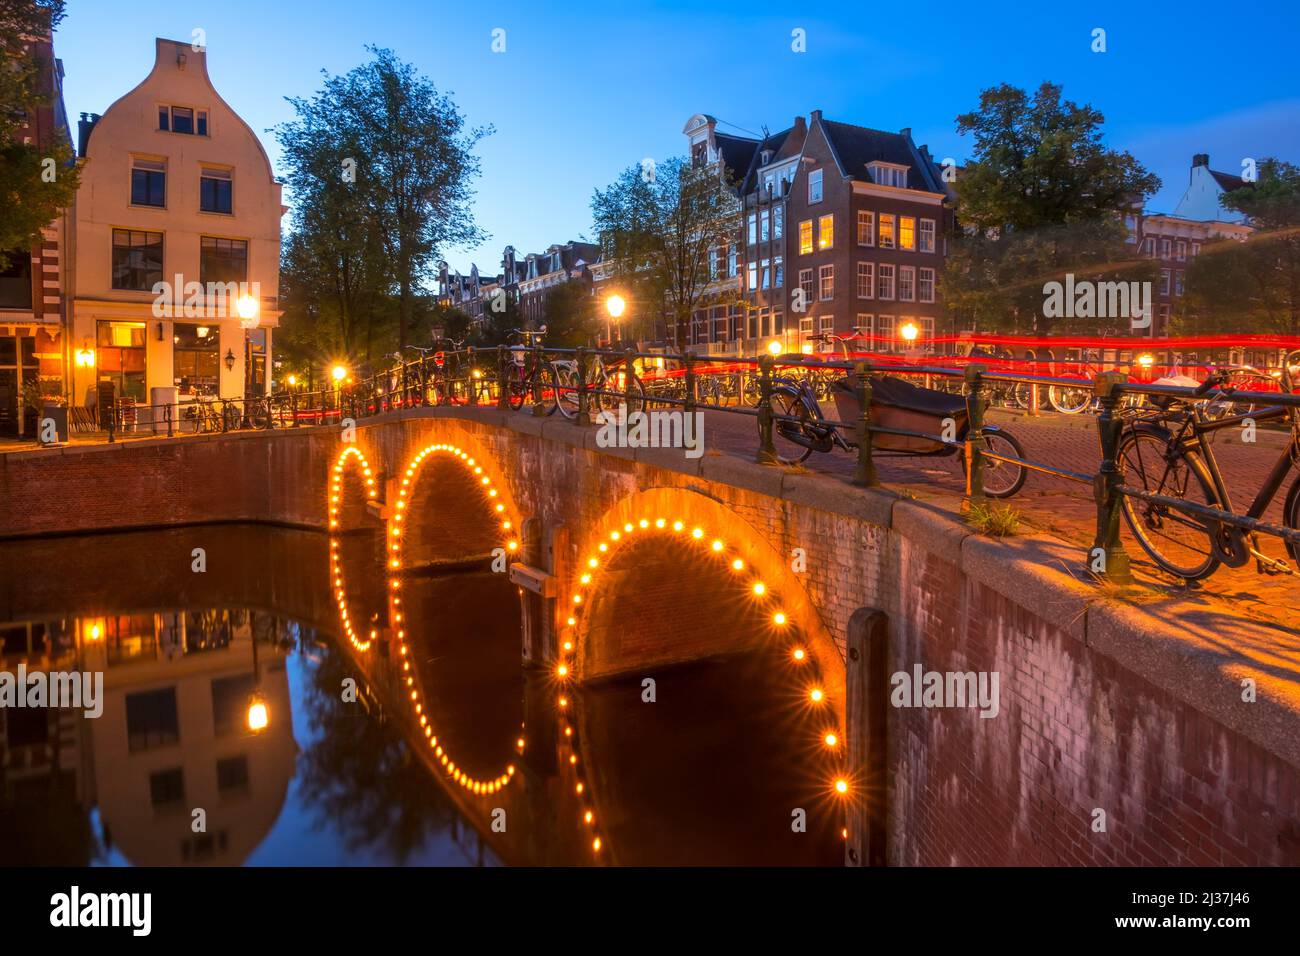 Netherlands. Stone bridge with three arches on the Amsterdam Canal. Lots of parked bikes. End of the night. Stock Photo